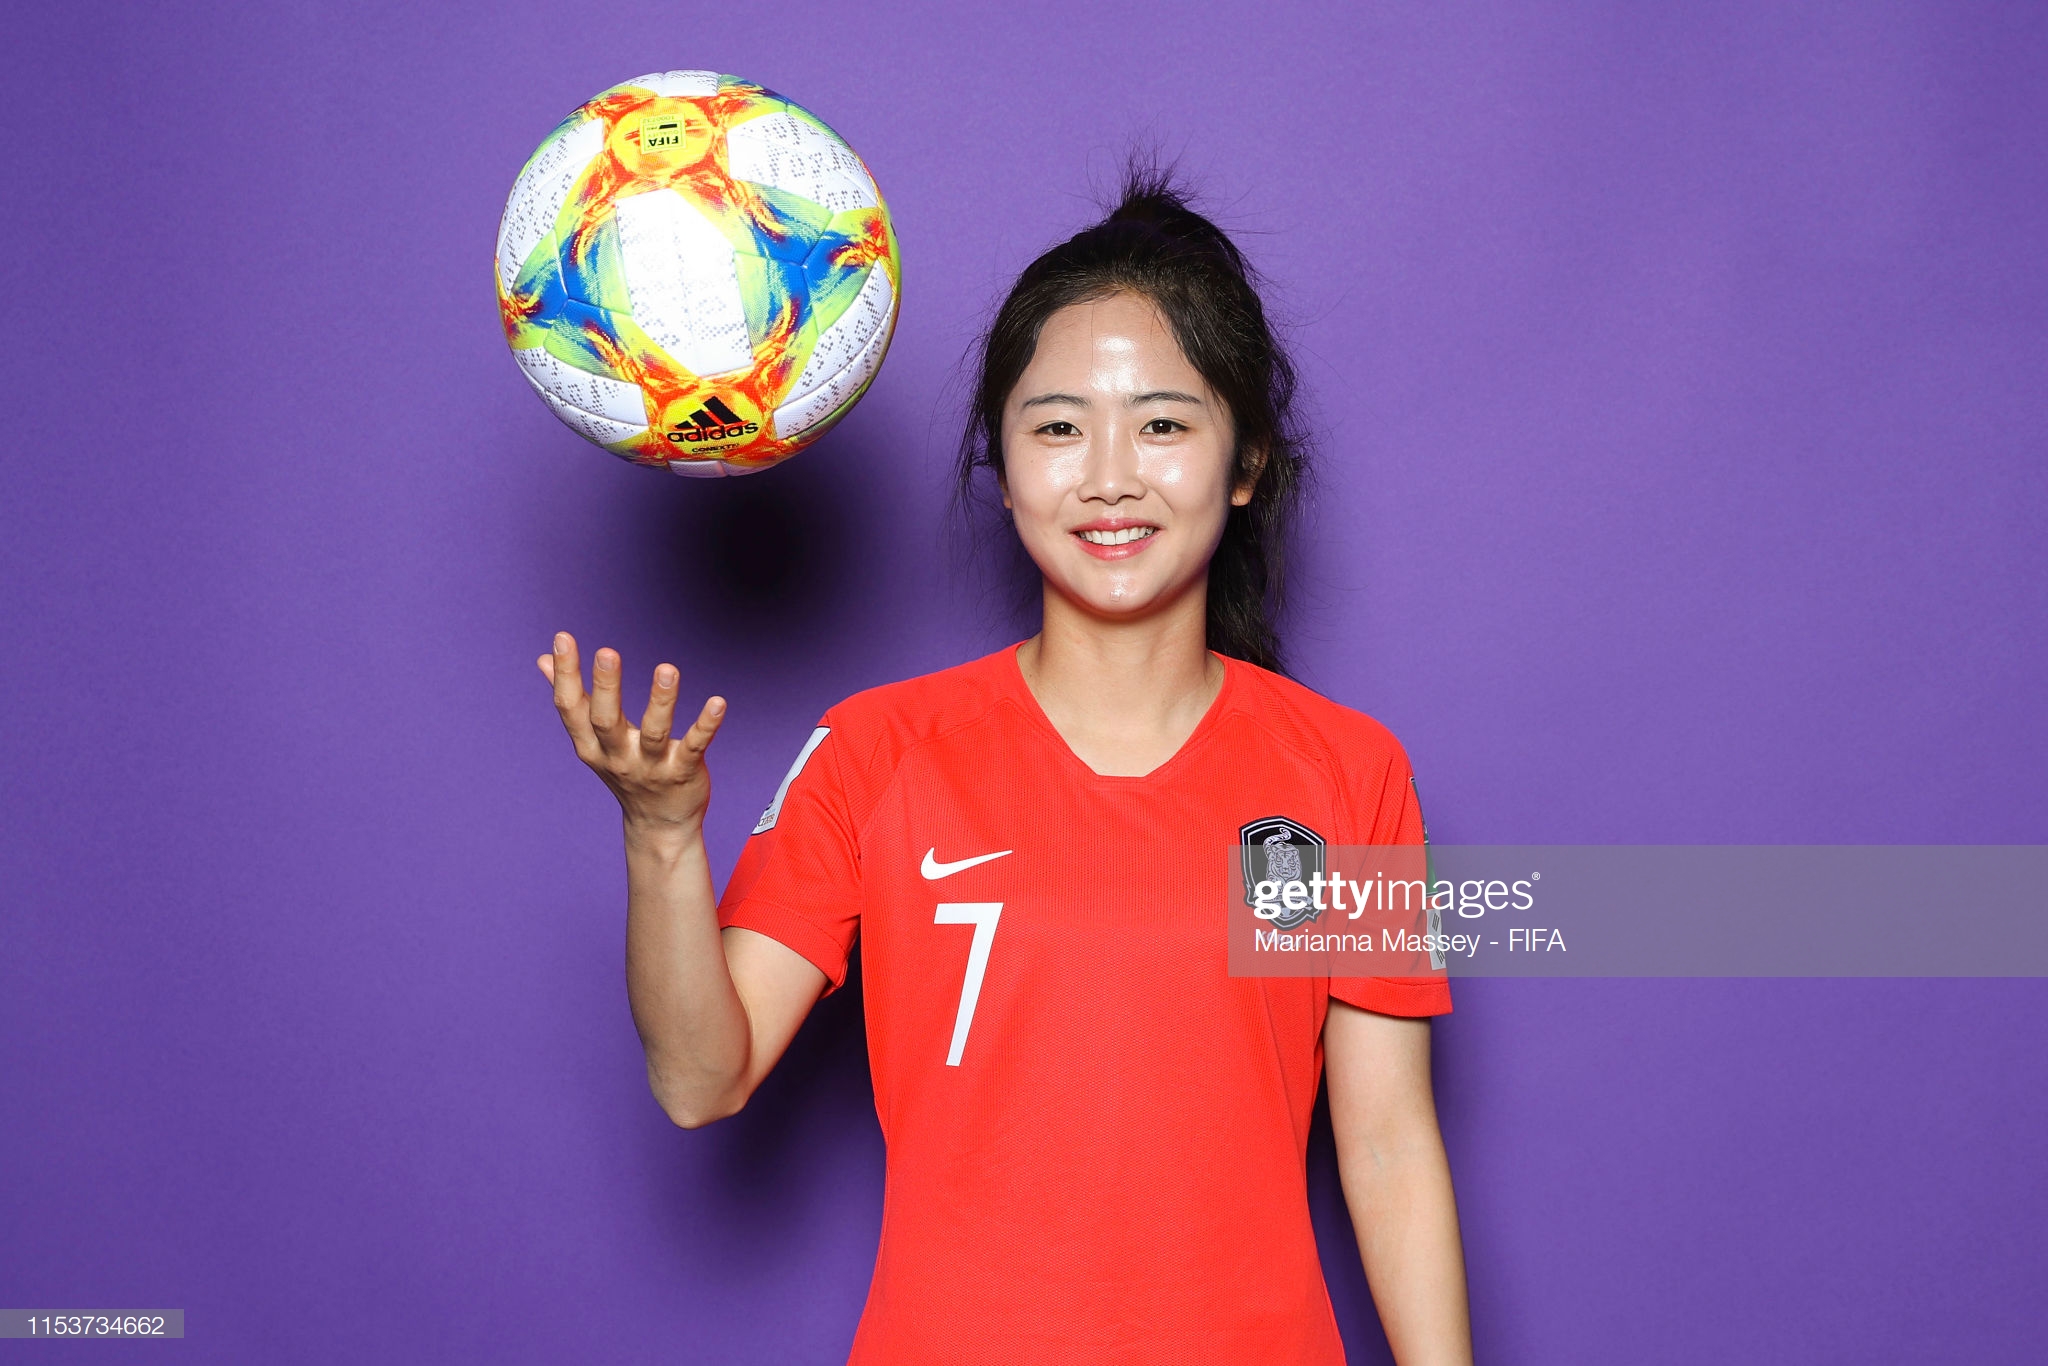 gettyimages-1153734662-2048x2048.jpg